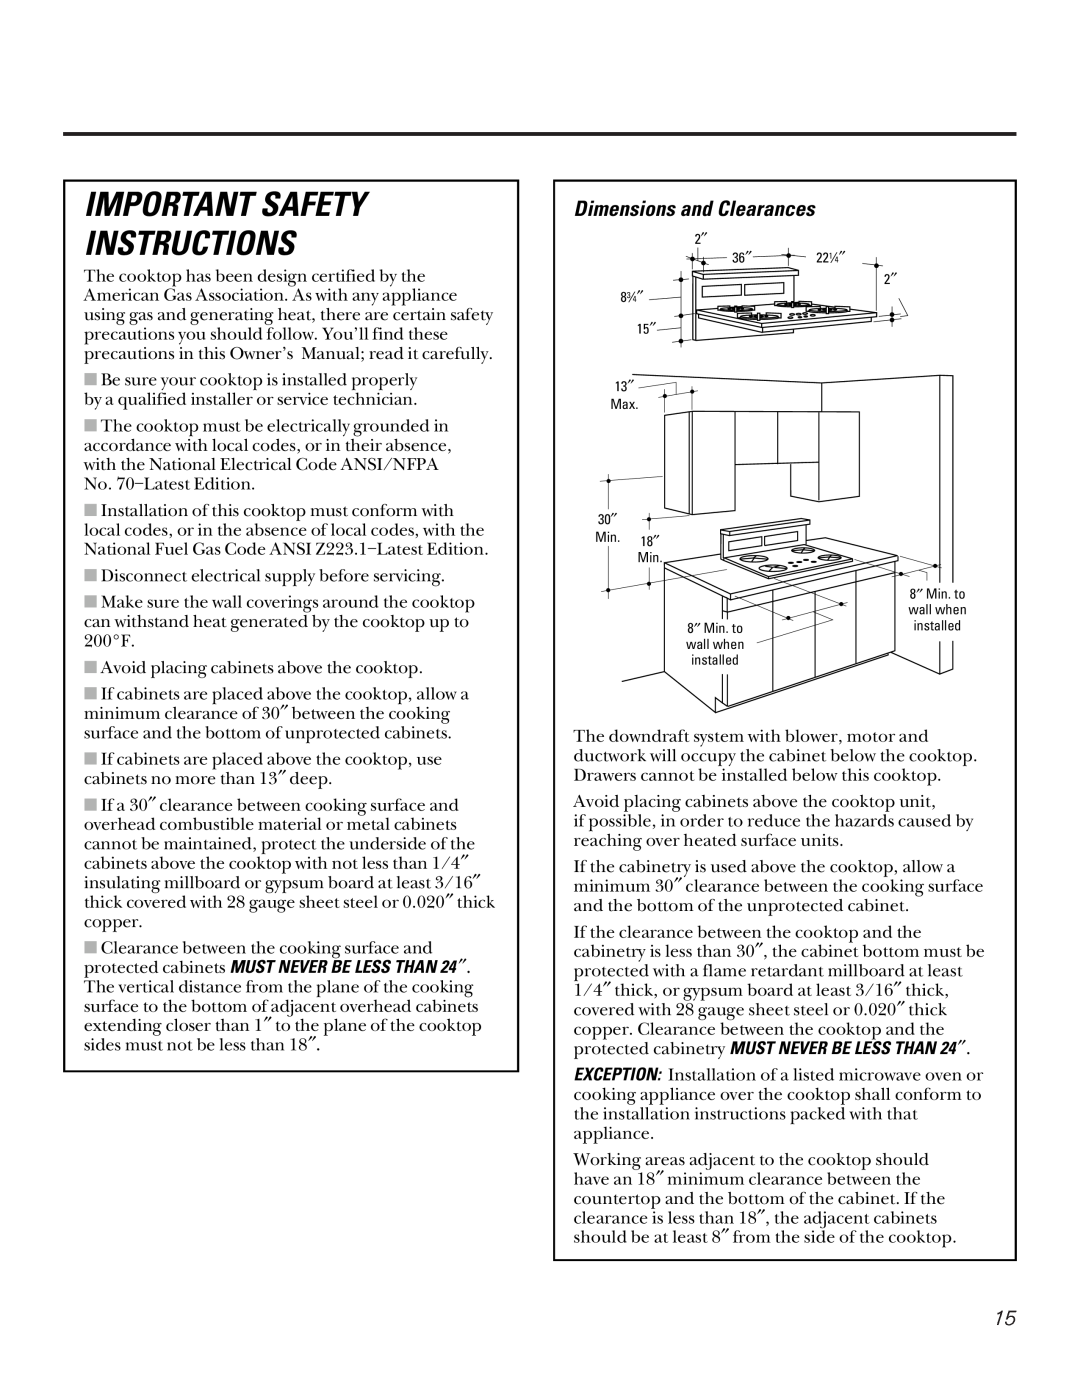 GE JGP656 installation instructions Important Safety Instructions, Dimensions and Clearances 